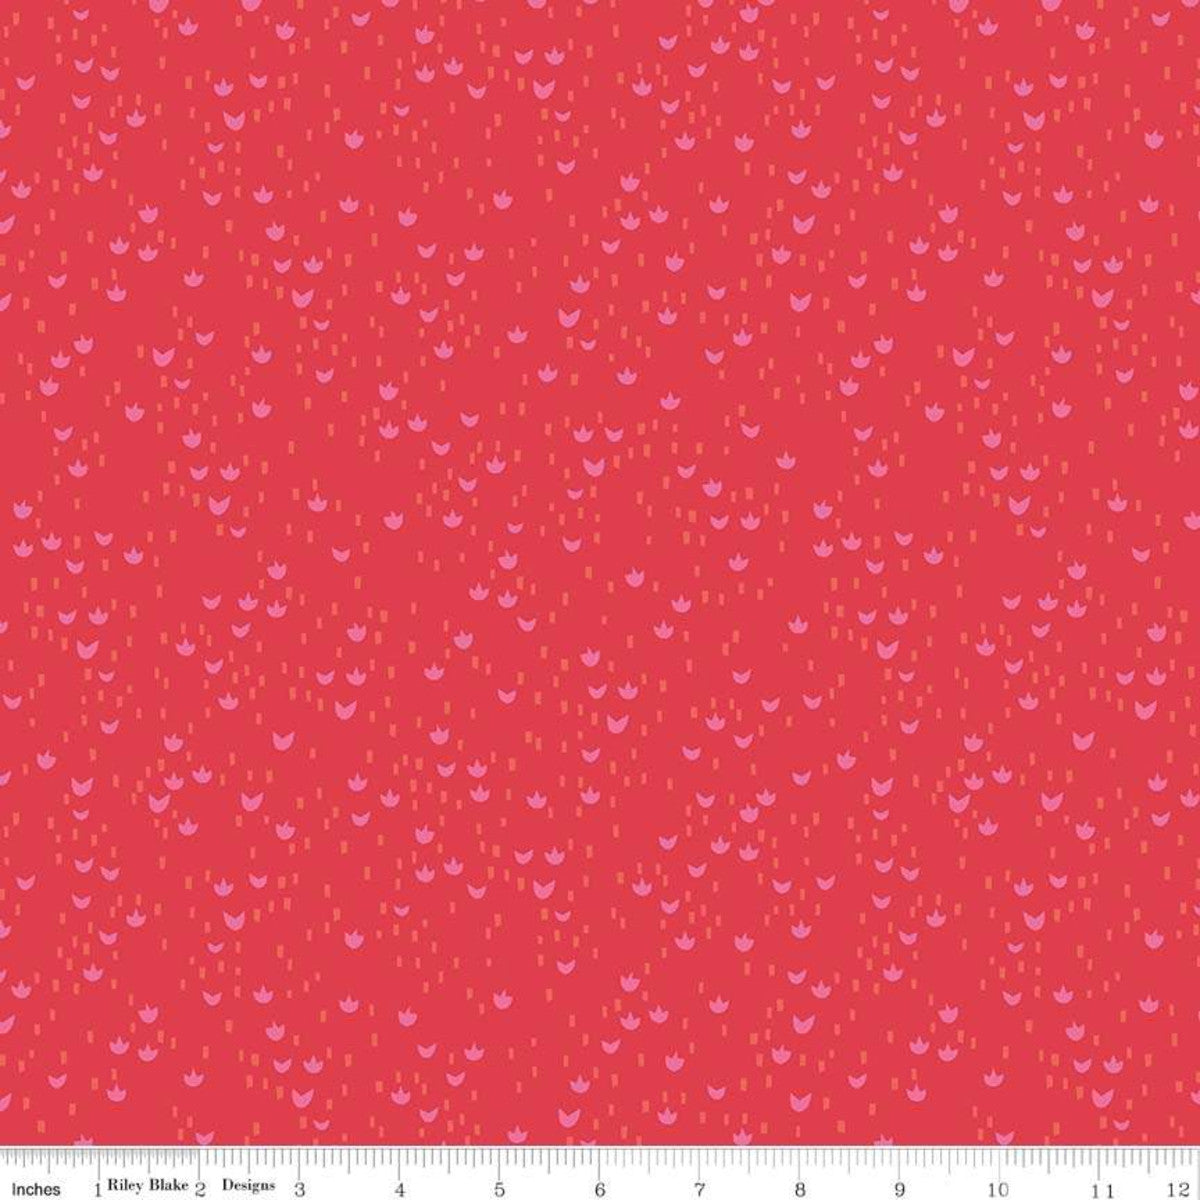 Red Riding Hood Meadows Red - Little Red In The Woods - Riley Blake Cotton Fabric ✂️ £7 pm *SALE*